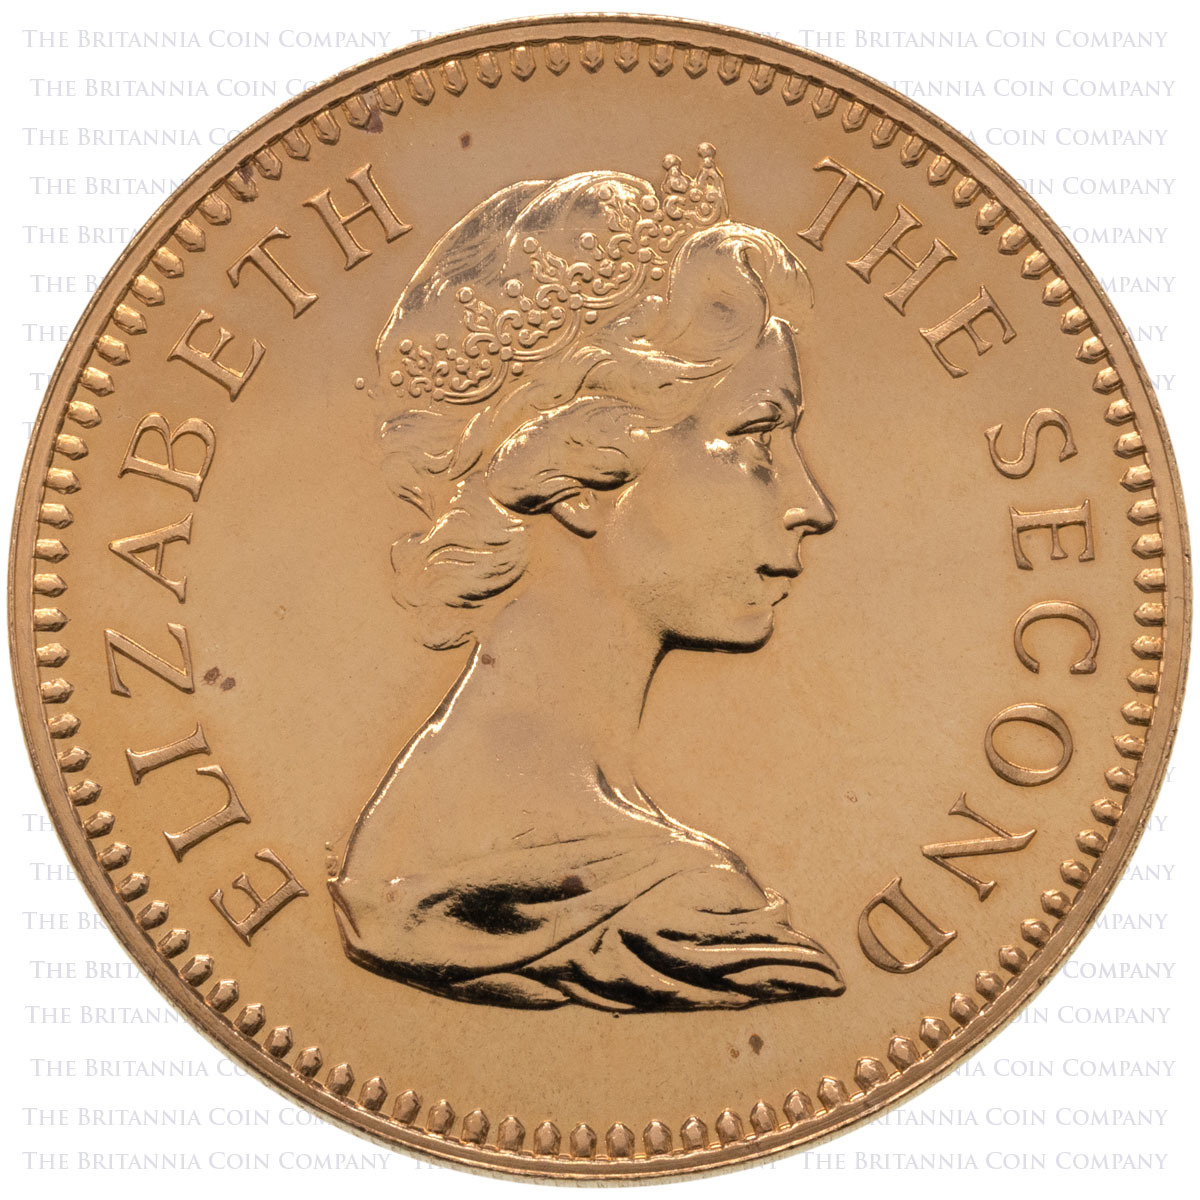 1966 Rhodesia Five Pound Gold Proof Coin Obverse